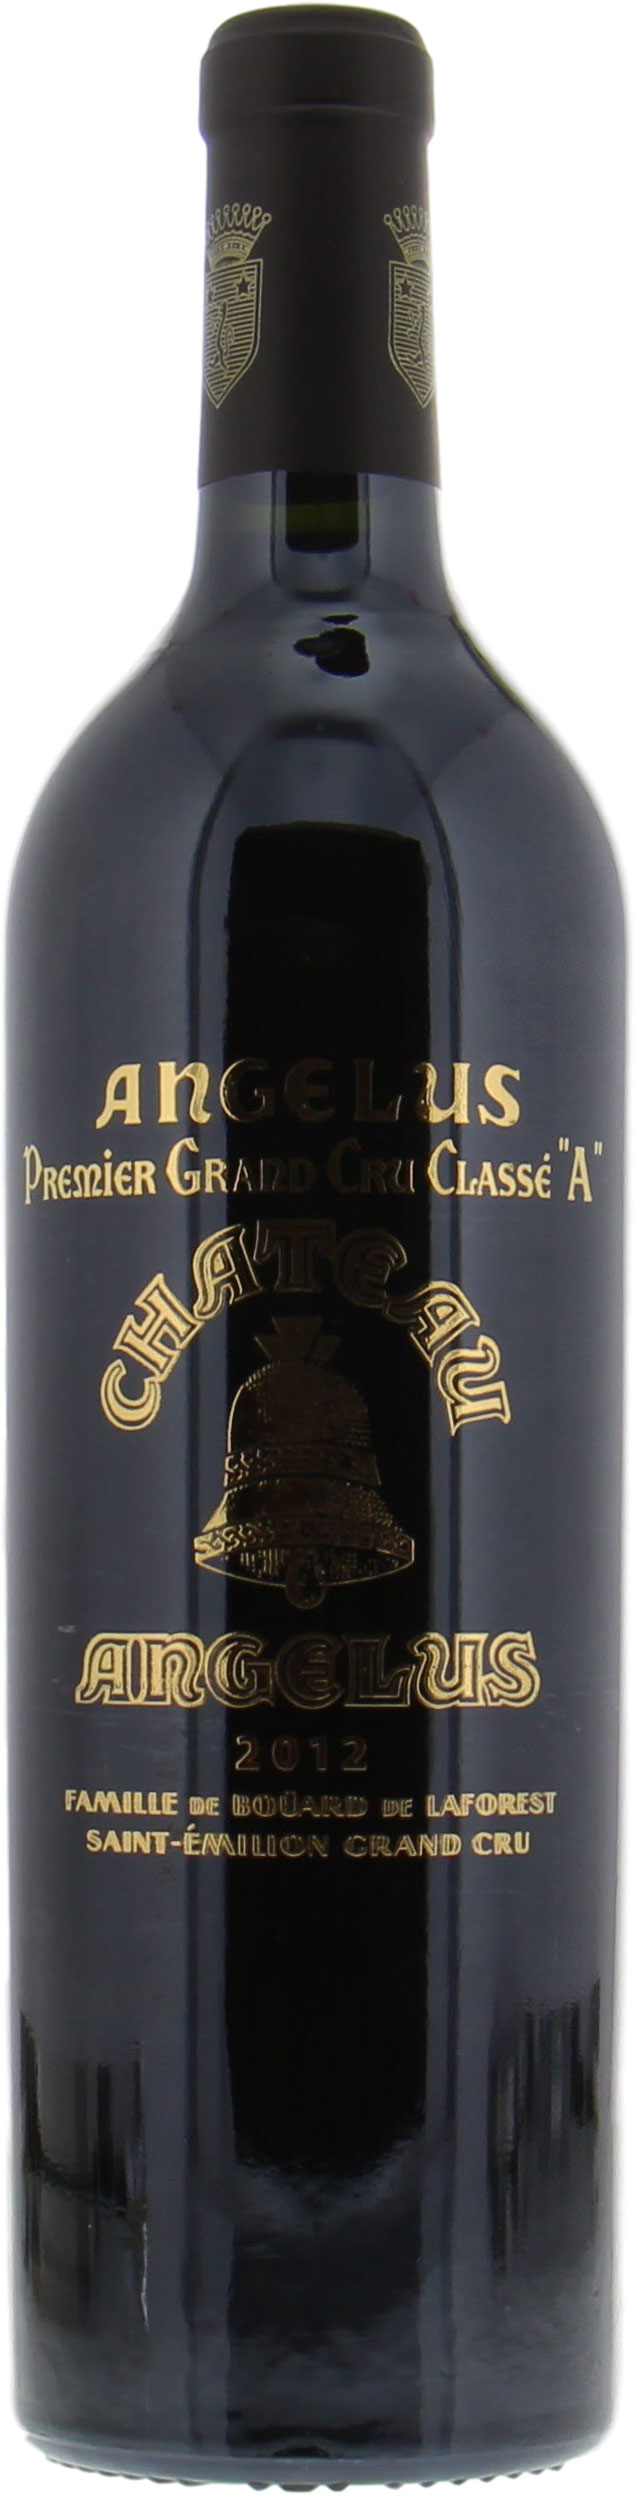 Chateau Angelus - Chateau Angelus 2012 From Original Wooden Case